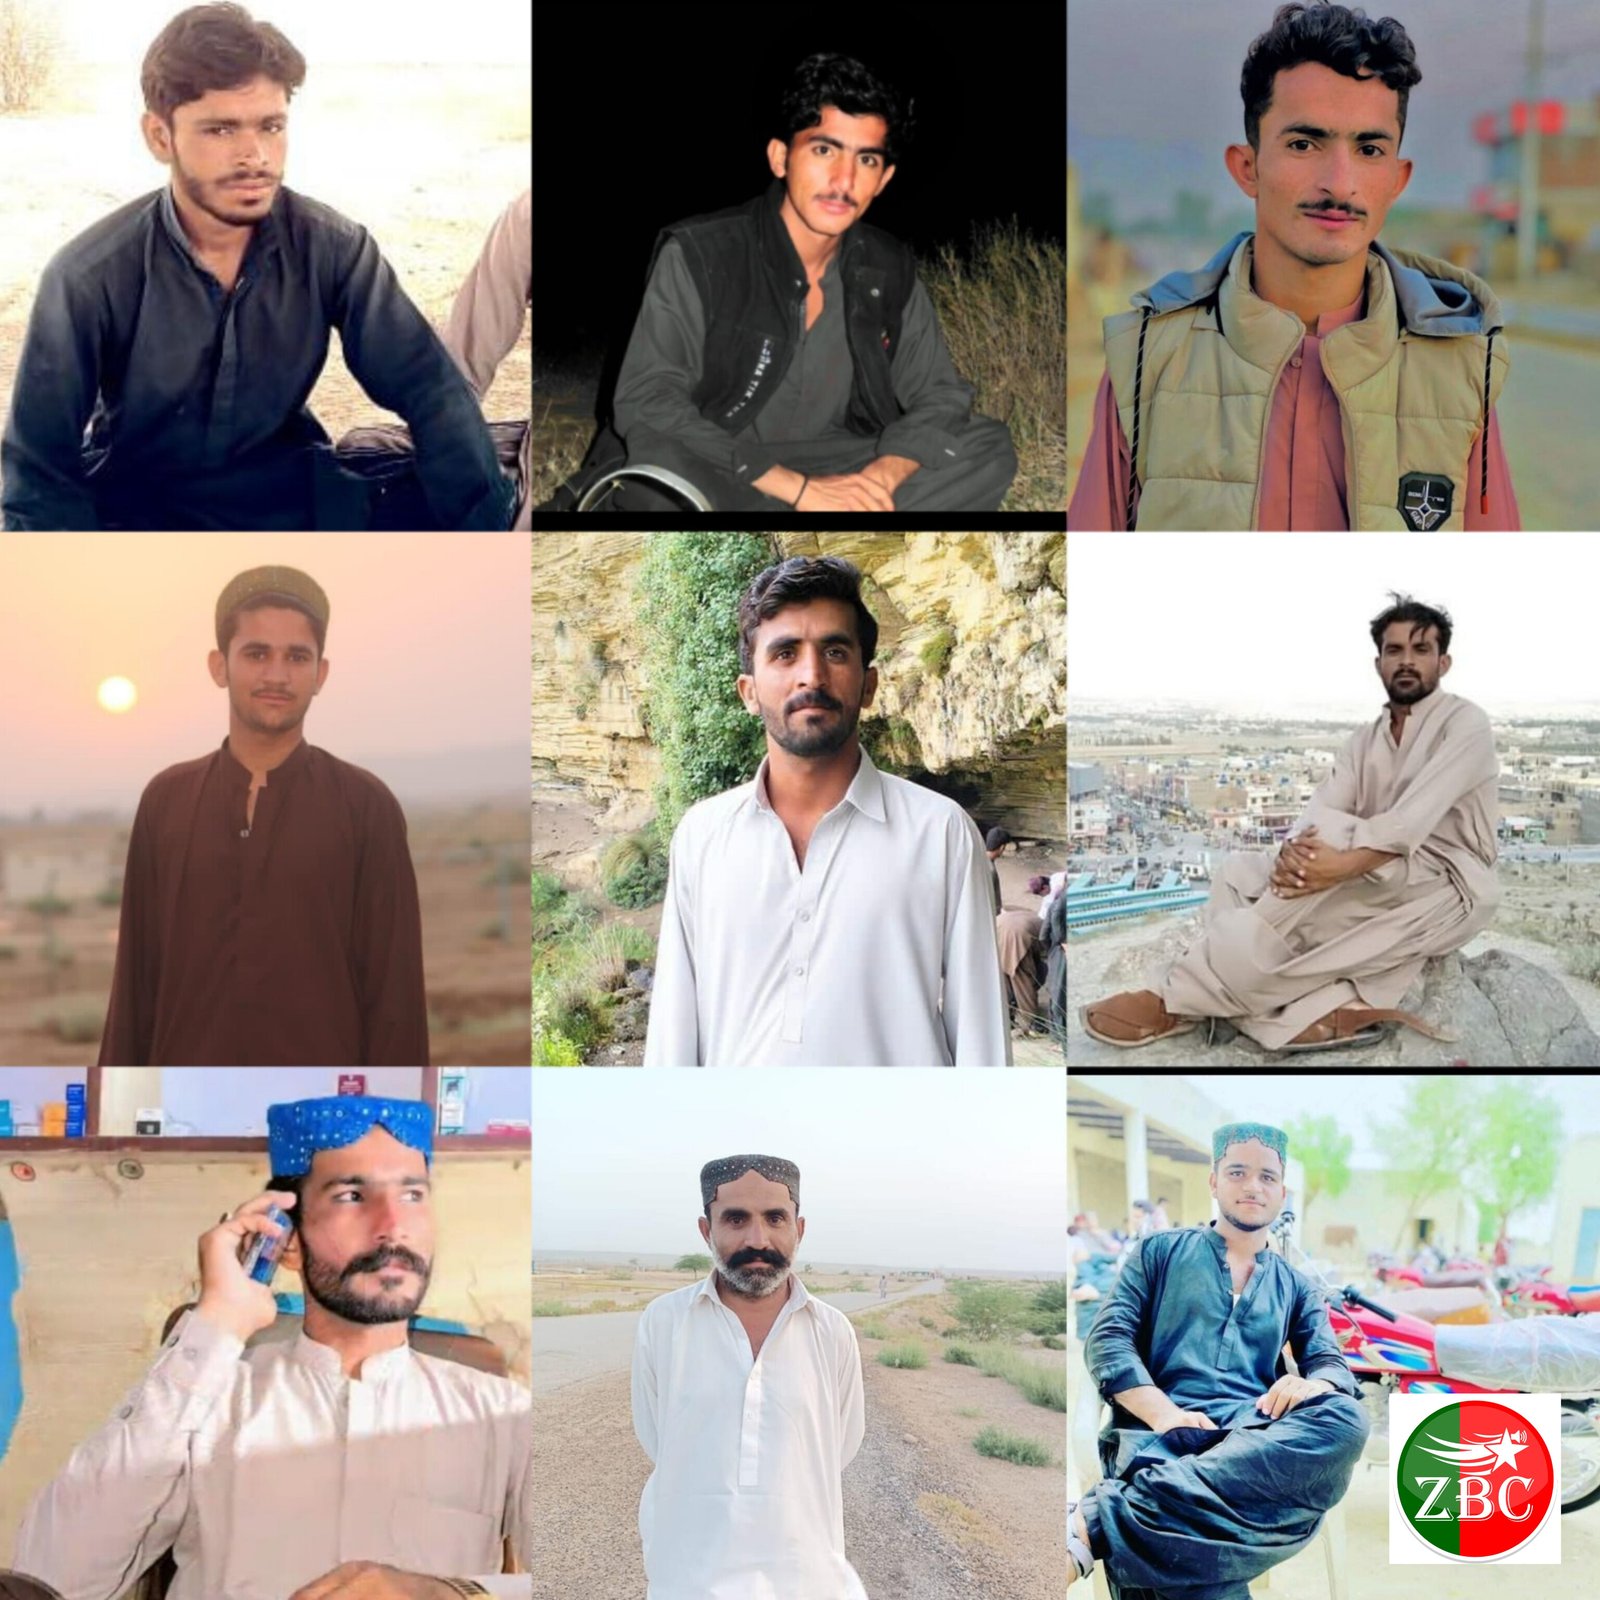 Dera Bugti: Pakistani forces forcibly disappeared several people in a military aggression